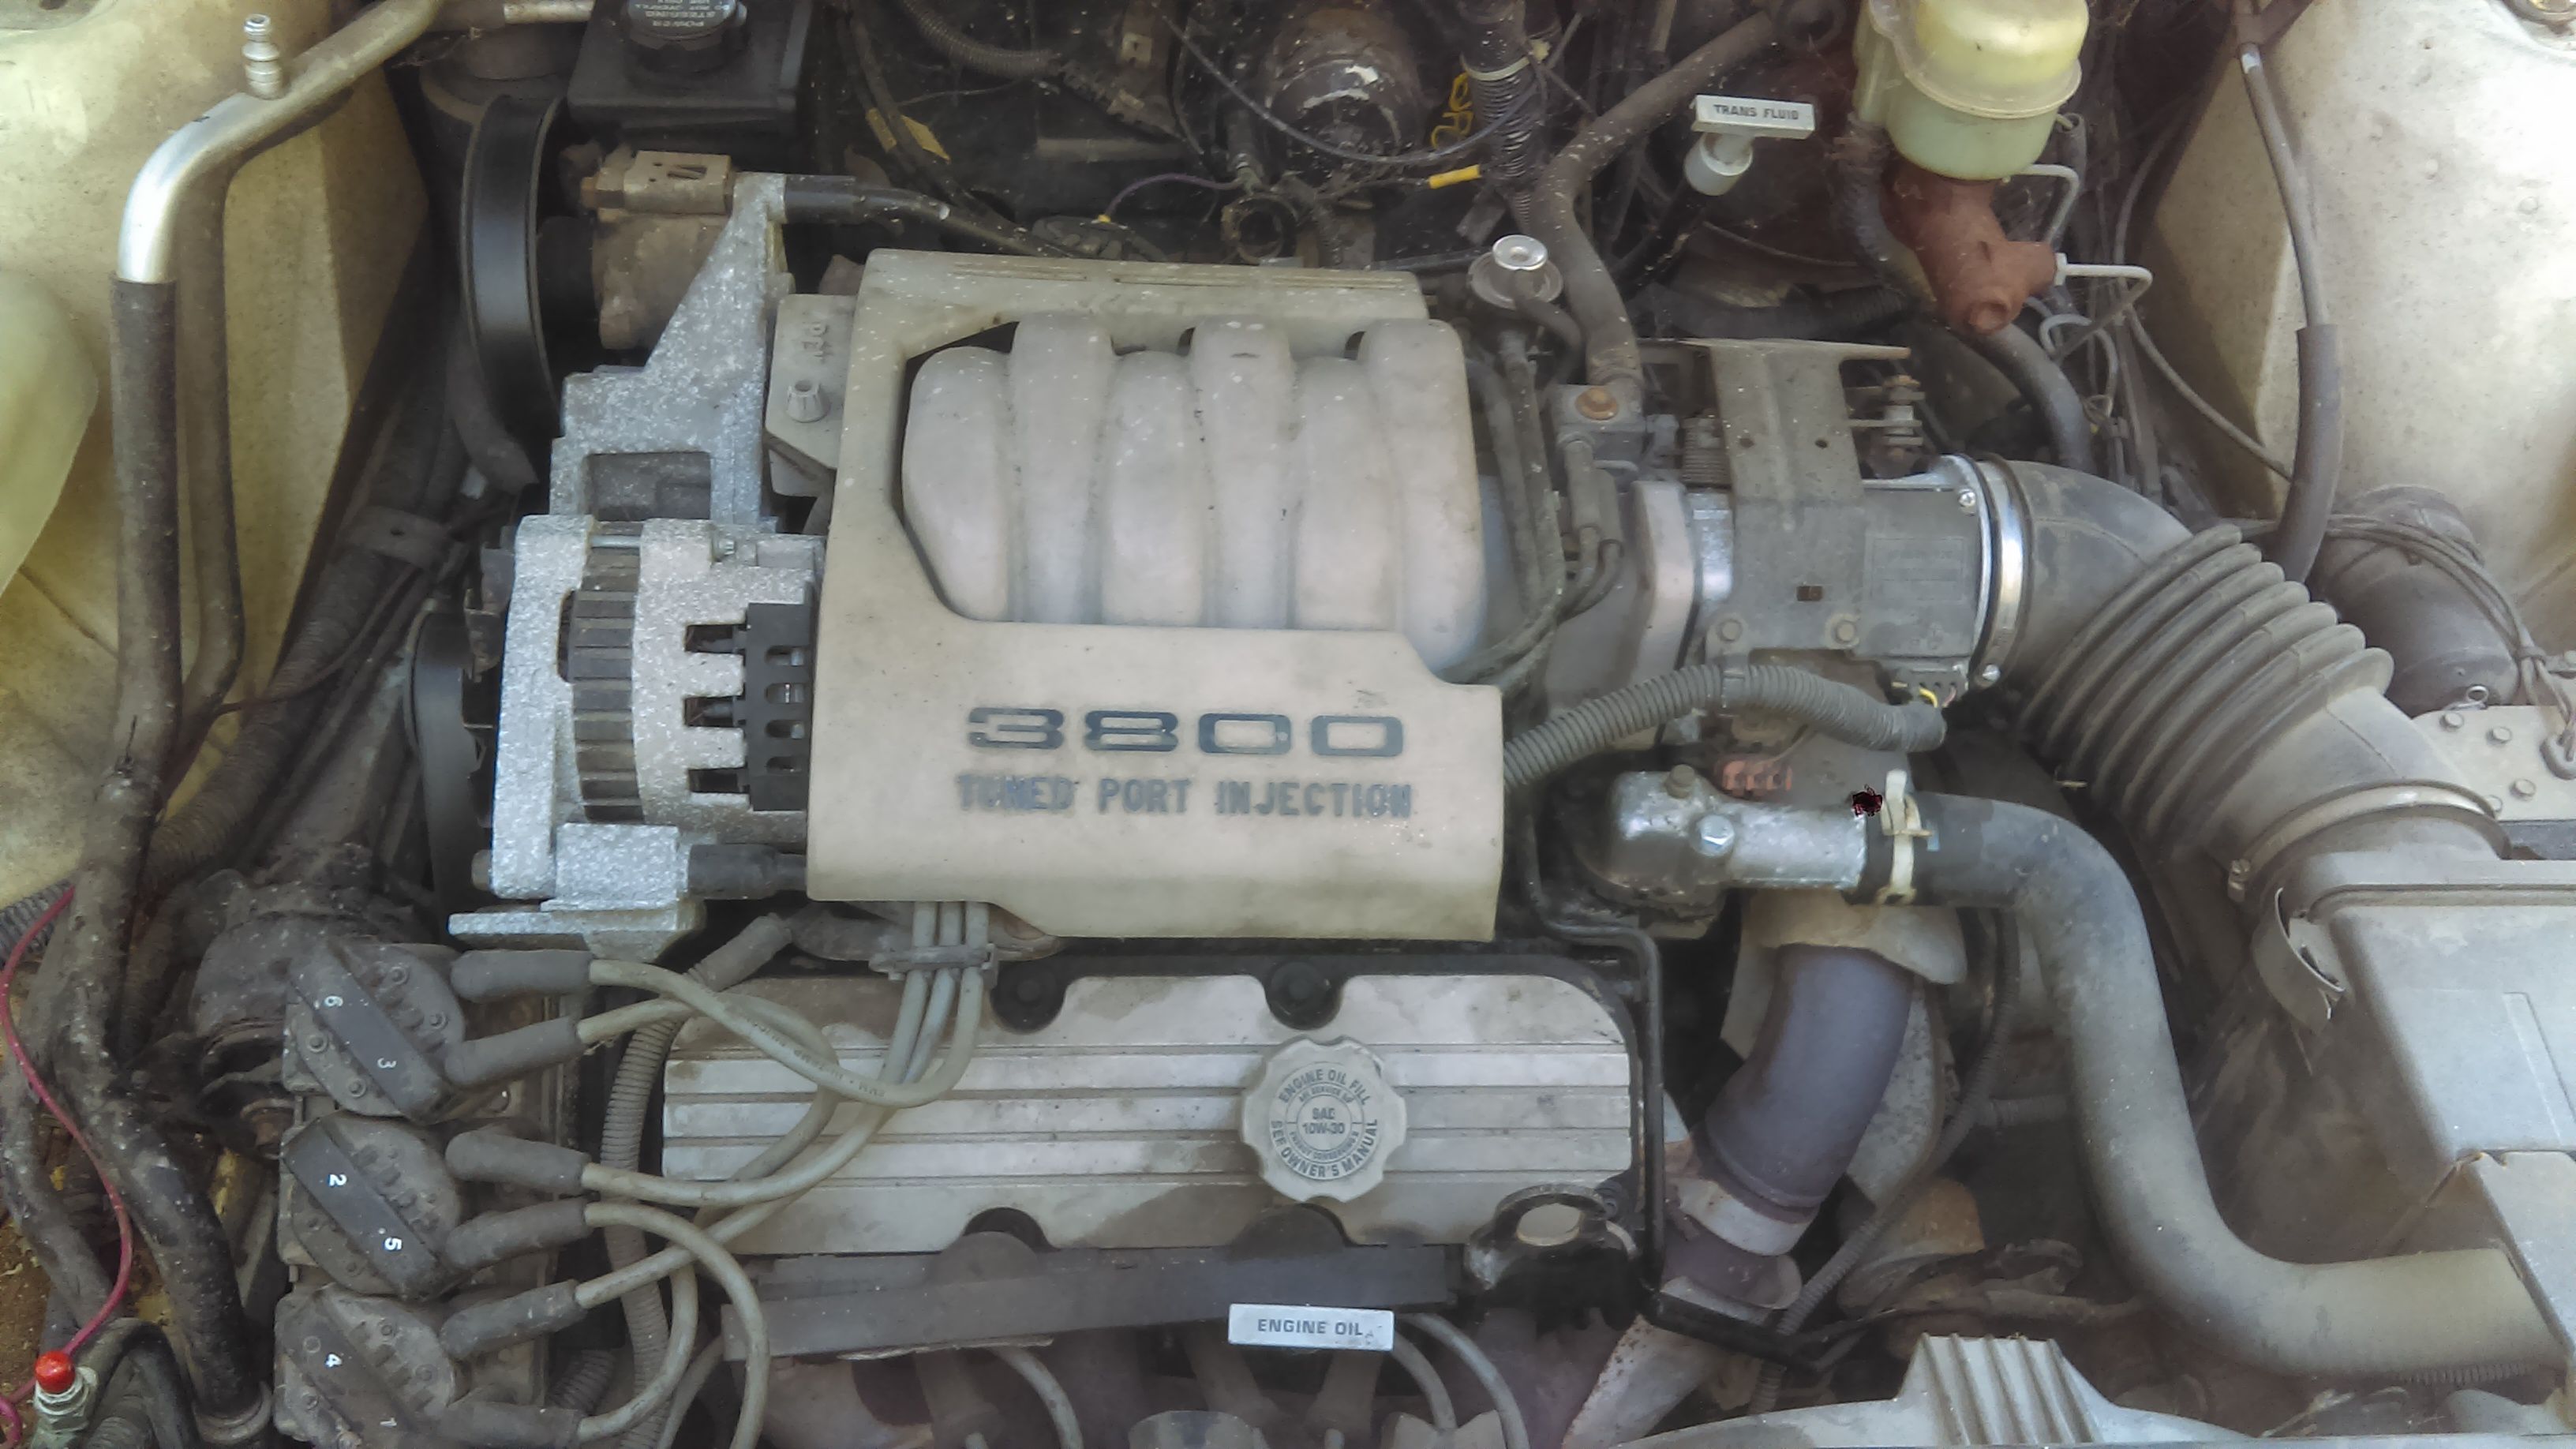 Oldsmobile 3800 injection motor and good transmission selling whole car